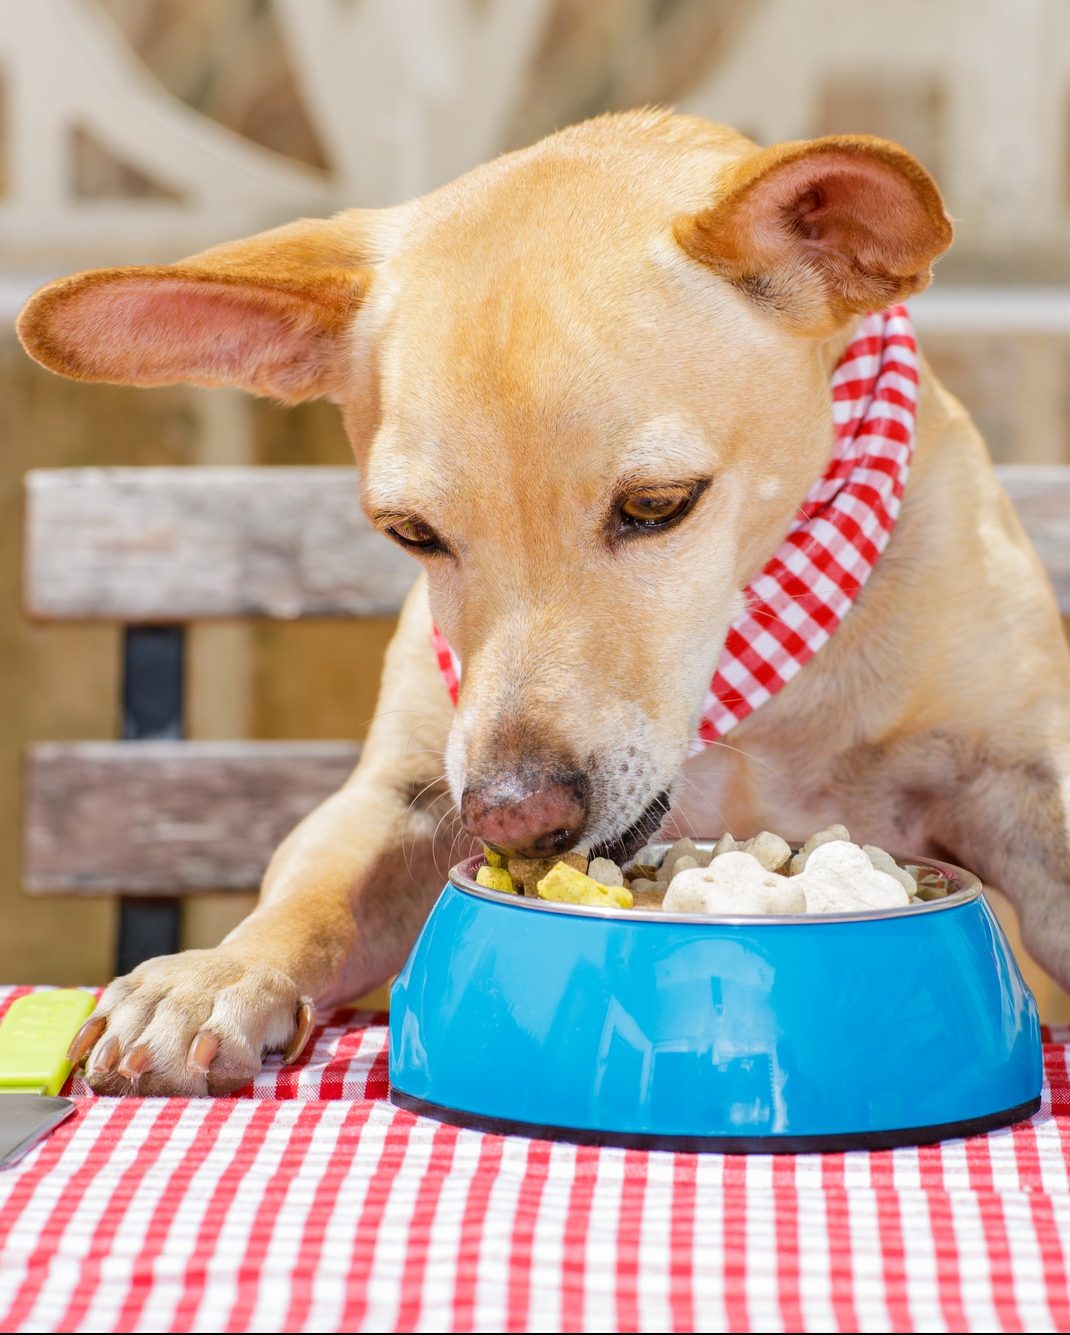 A dog eating from food bowl on the table.